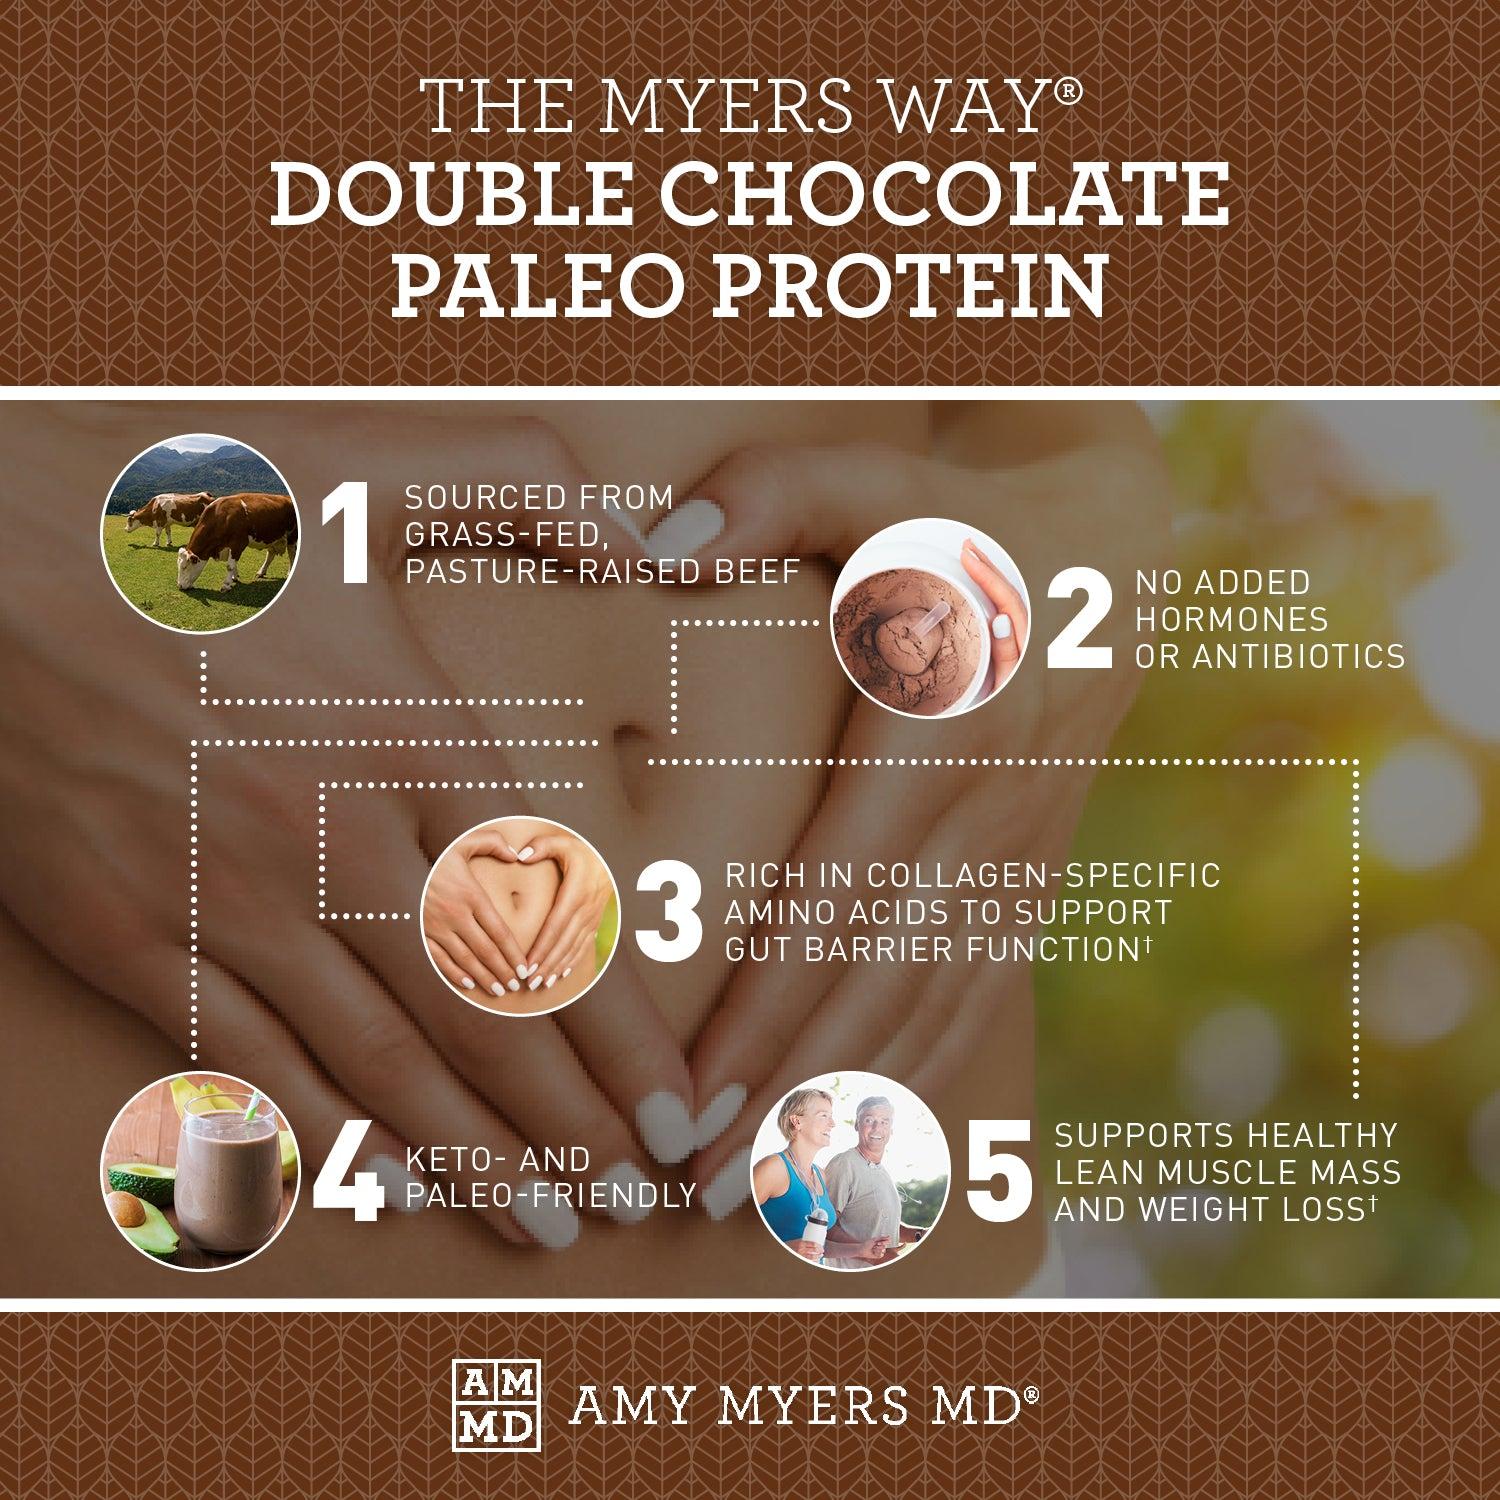 Paleo Protein - Double Chocolate 7 Day Pack - From grass-fed, pasture raised beef, Rich in collagen specific amino acids, keto and paleo friendly, supports lean muscle mass - Infographic - Amy Myers MD